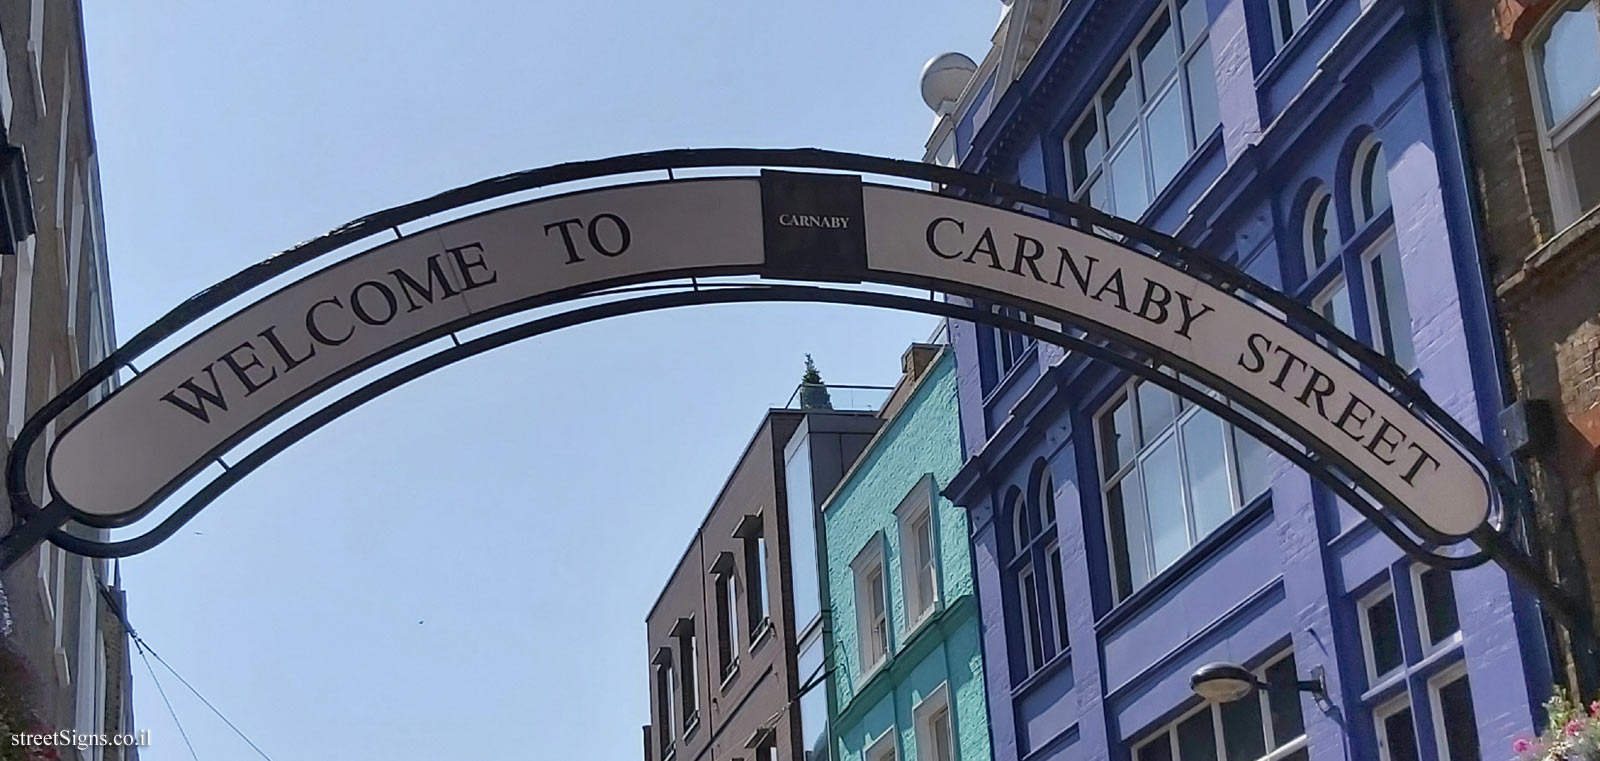 London -  The sign posted on Carnaby Street